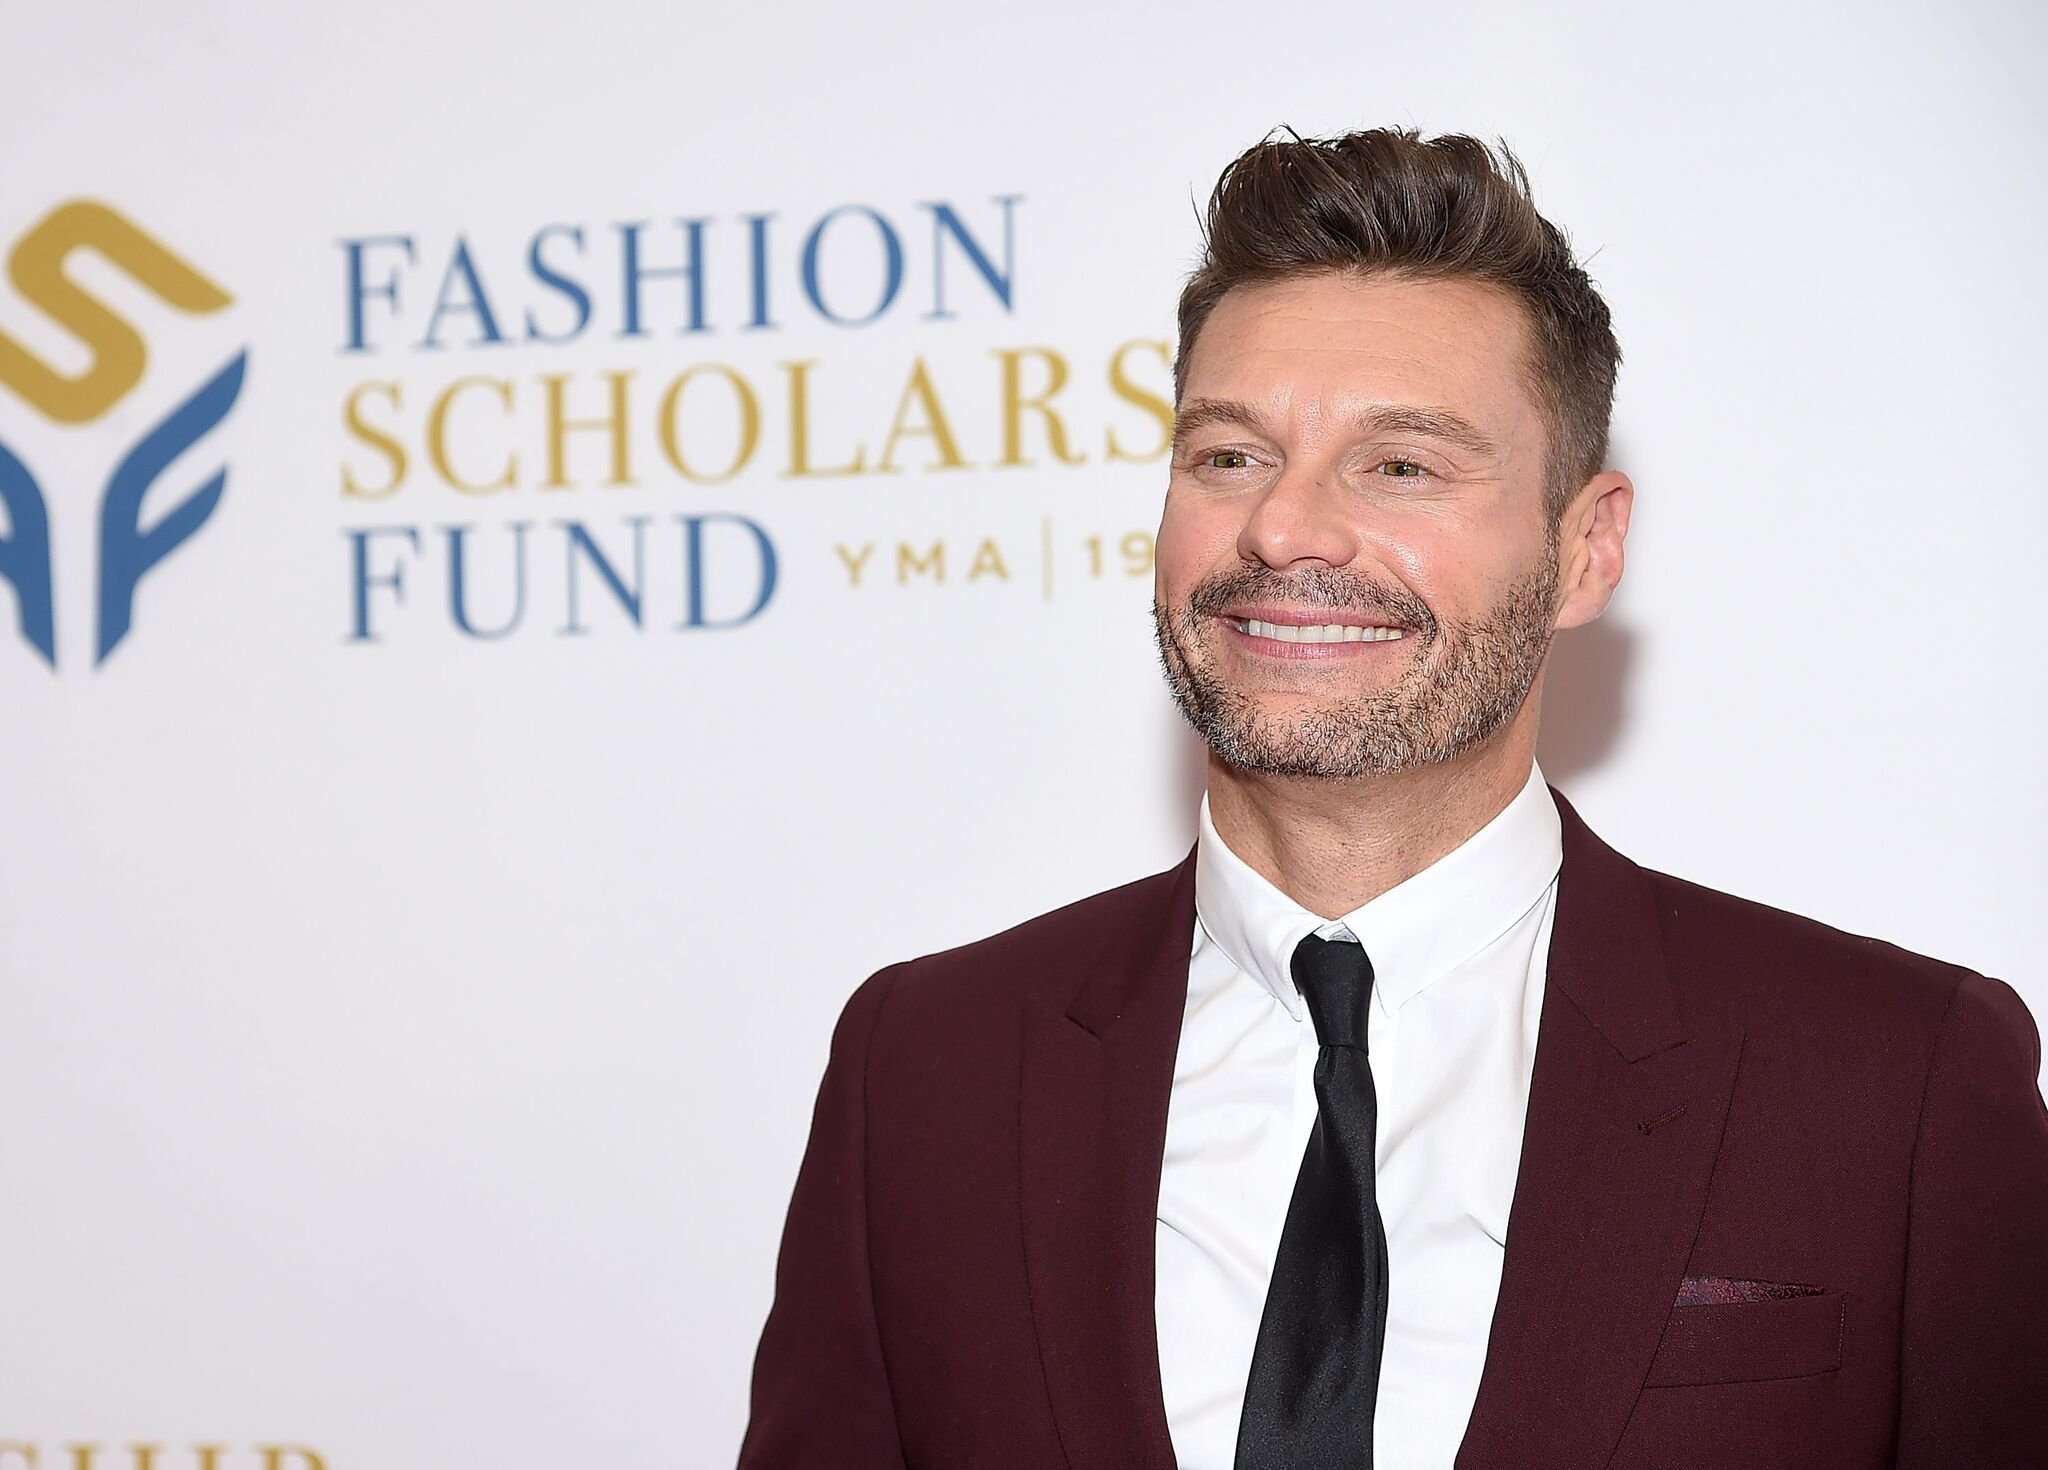 Ryan Seacrest attends the 2019 Fashion Scholarship Fund at the Hilton New York | Getty Images